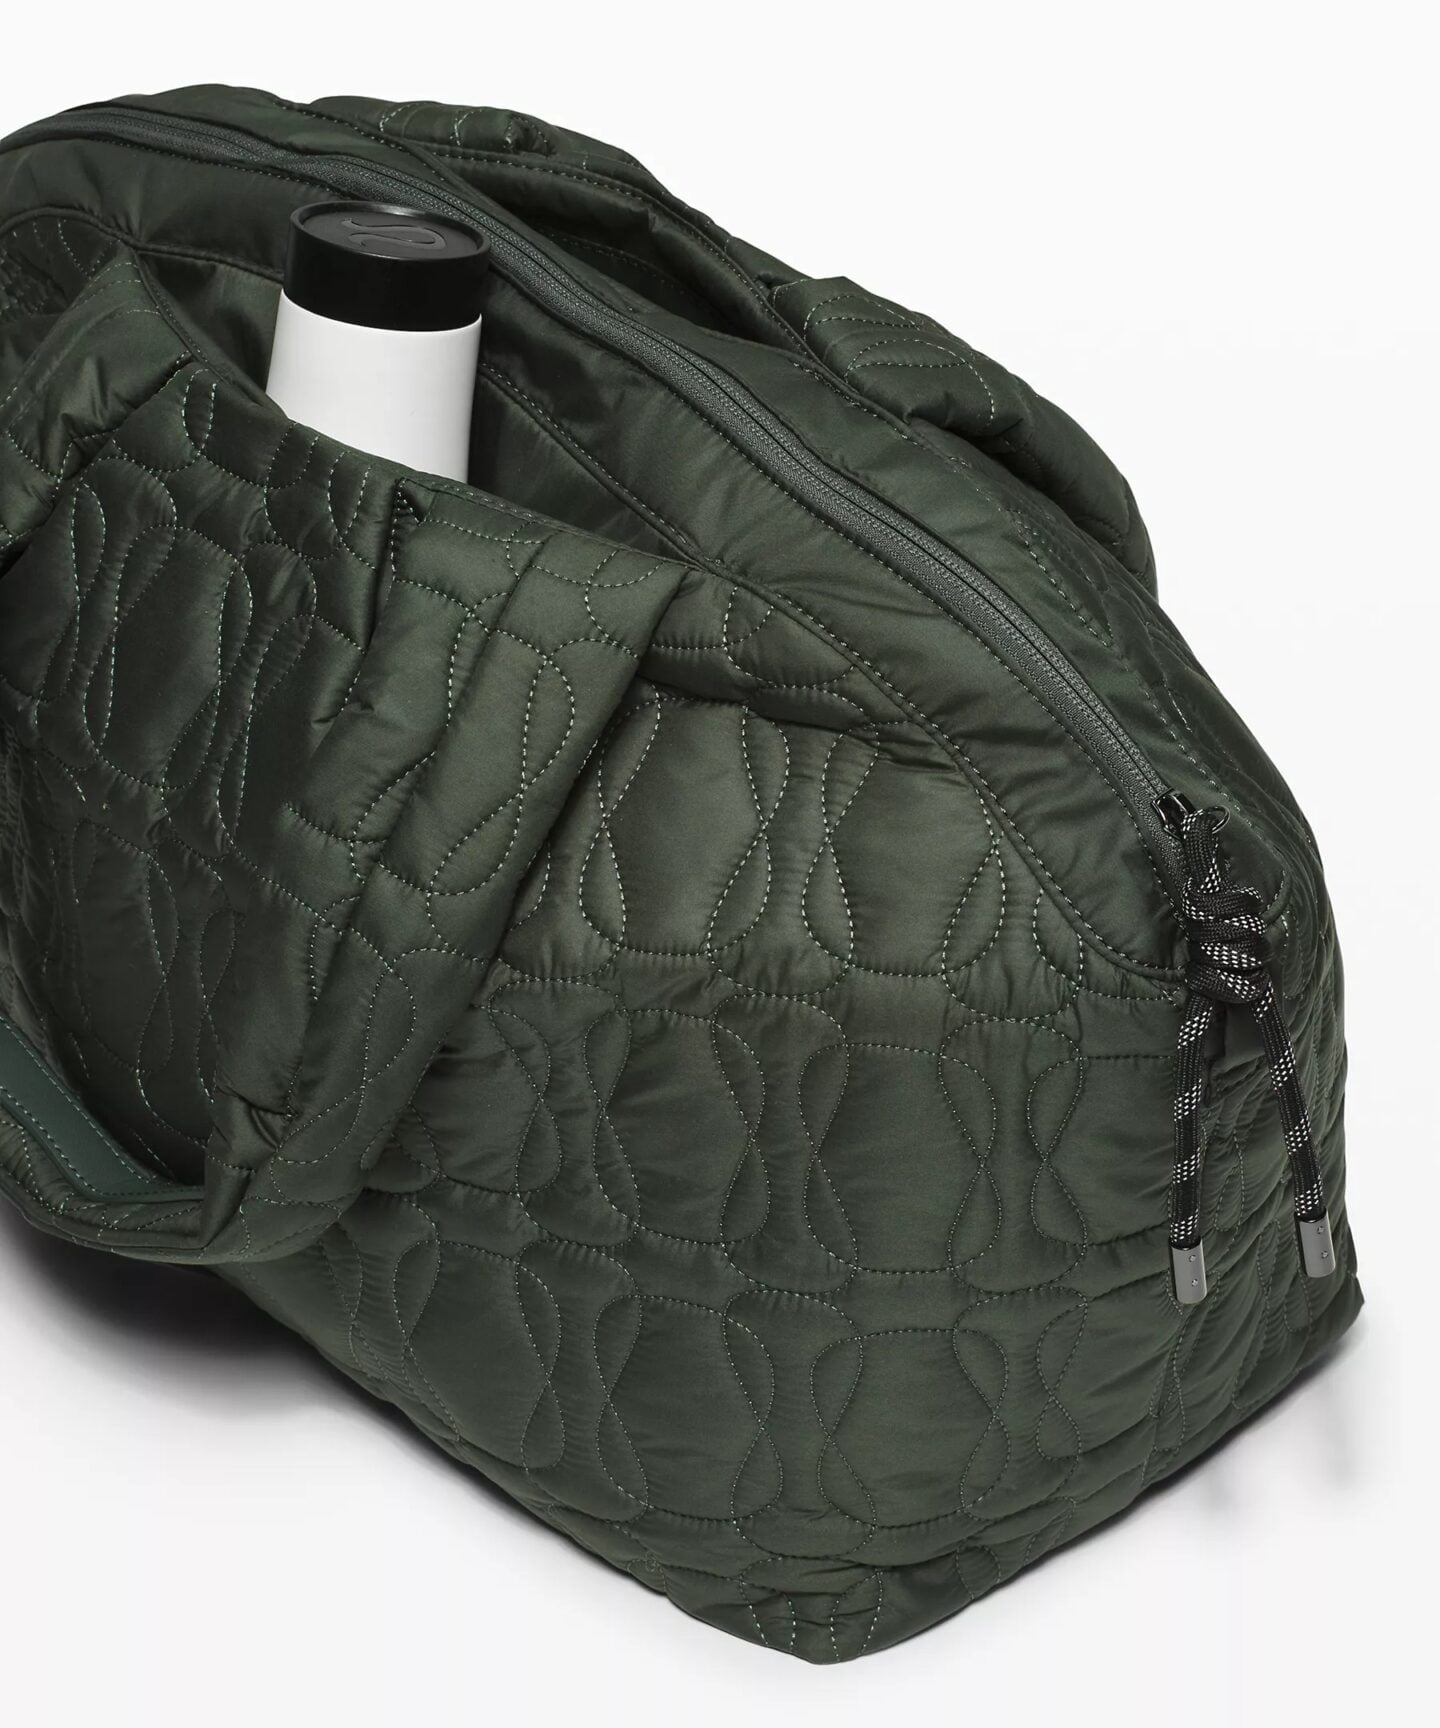 Pillow Bags from lululemon Uncategorized. The pillow bag trend you 